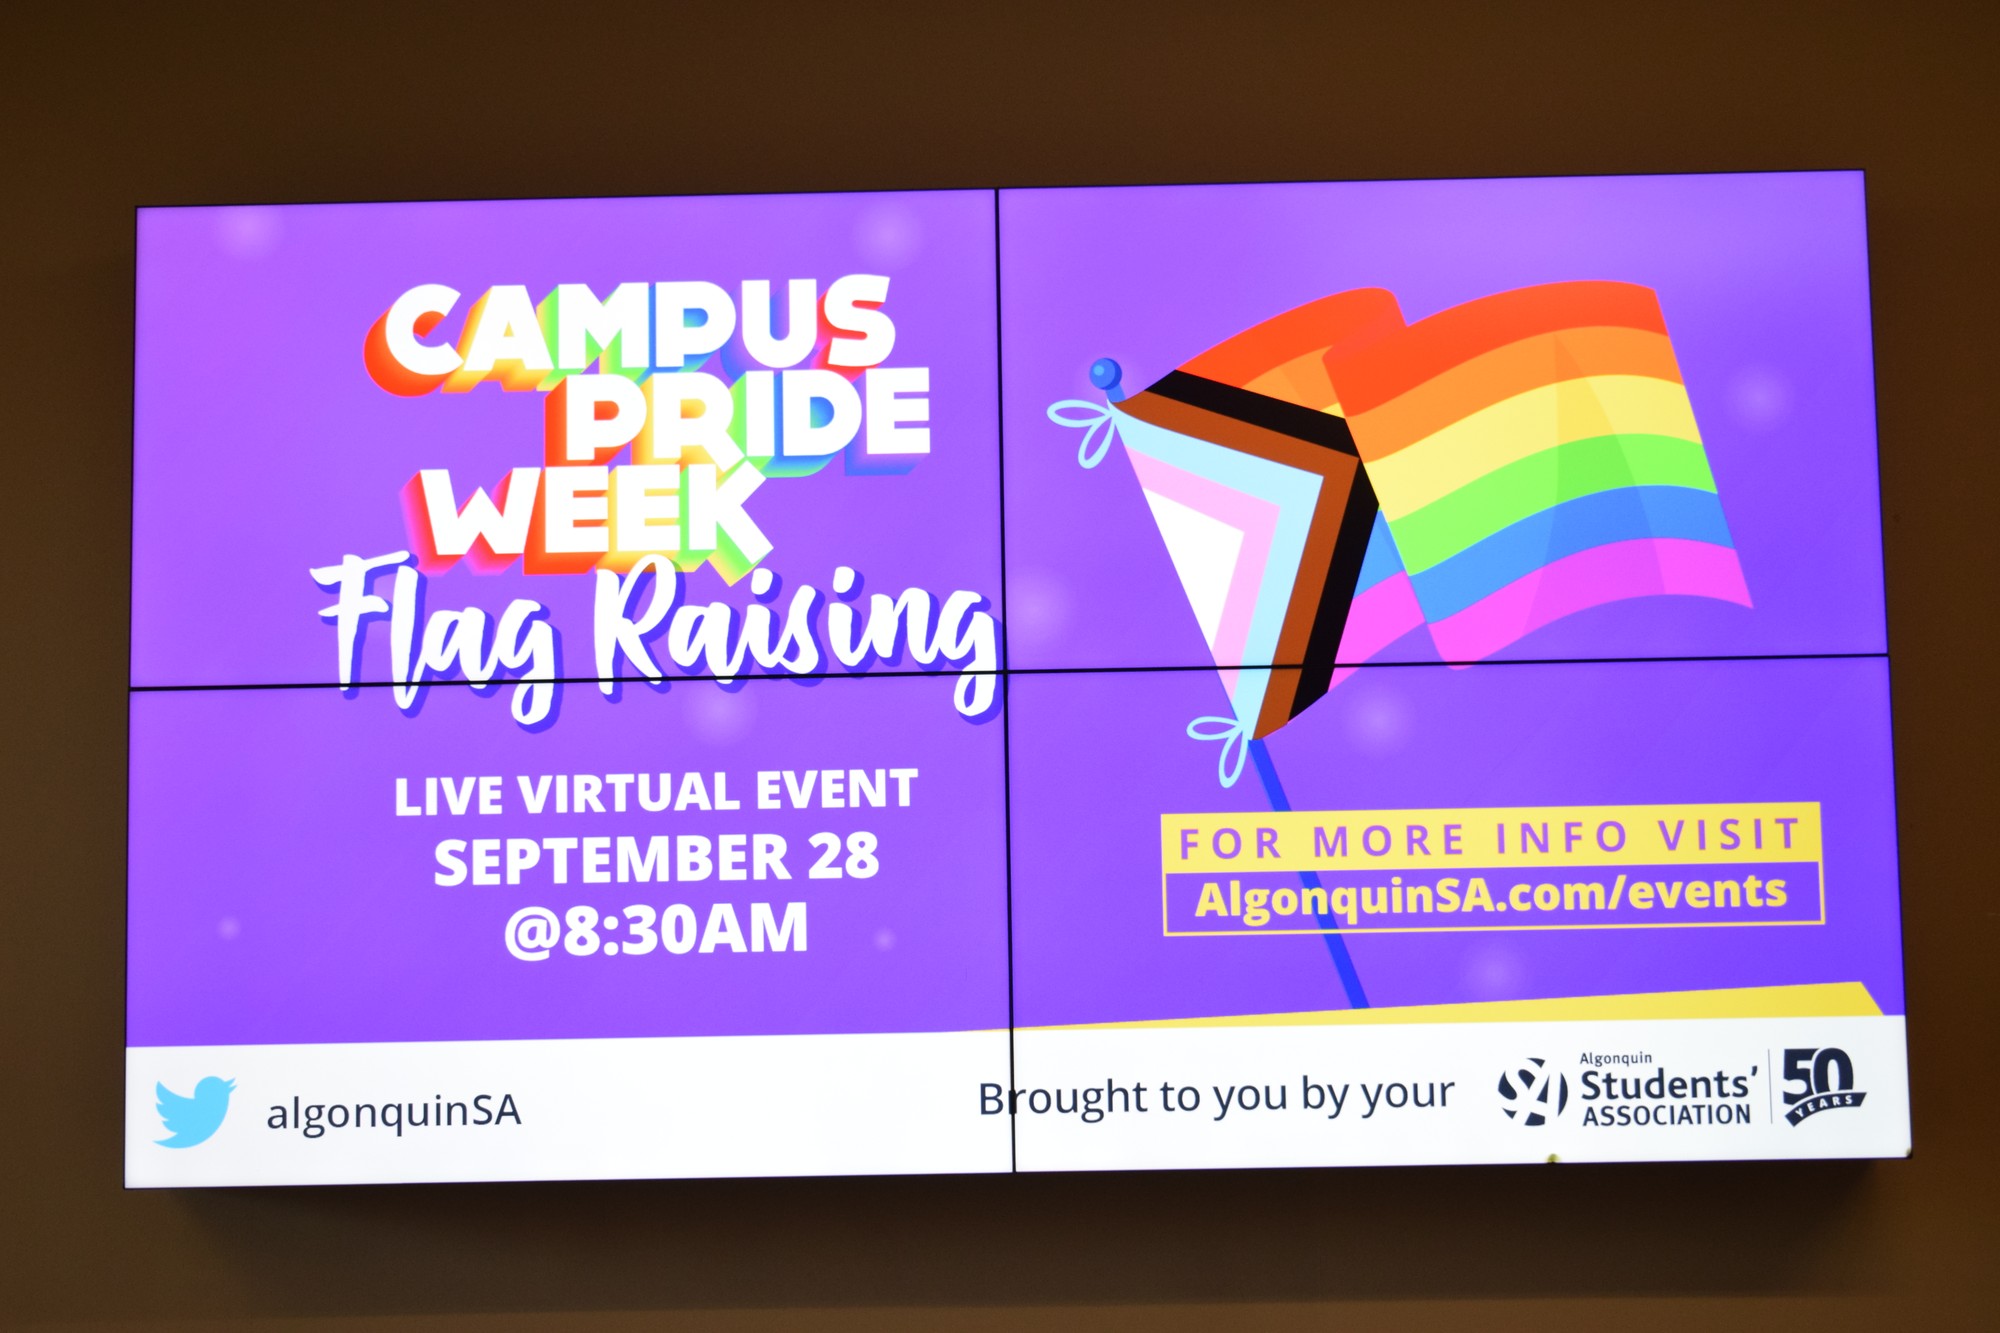 As part of Campus Pride Week, the Students' Association celebrated the flag-raising event virtually.